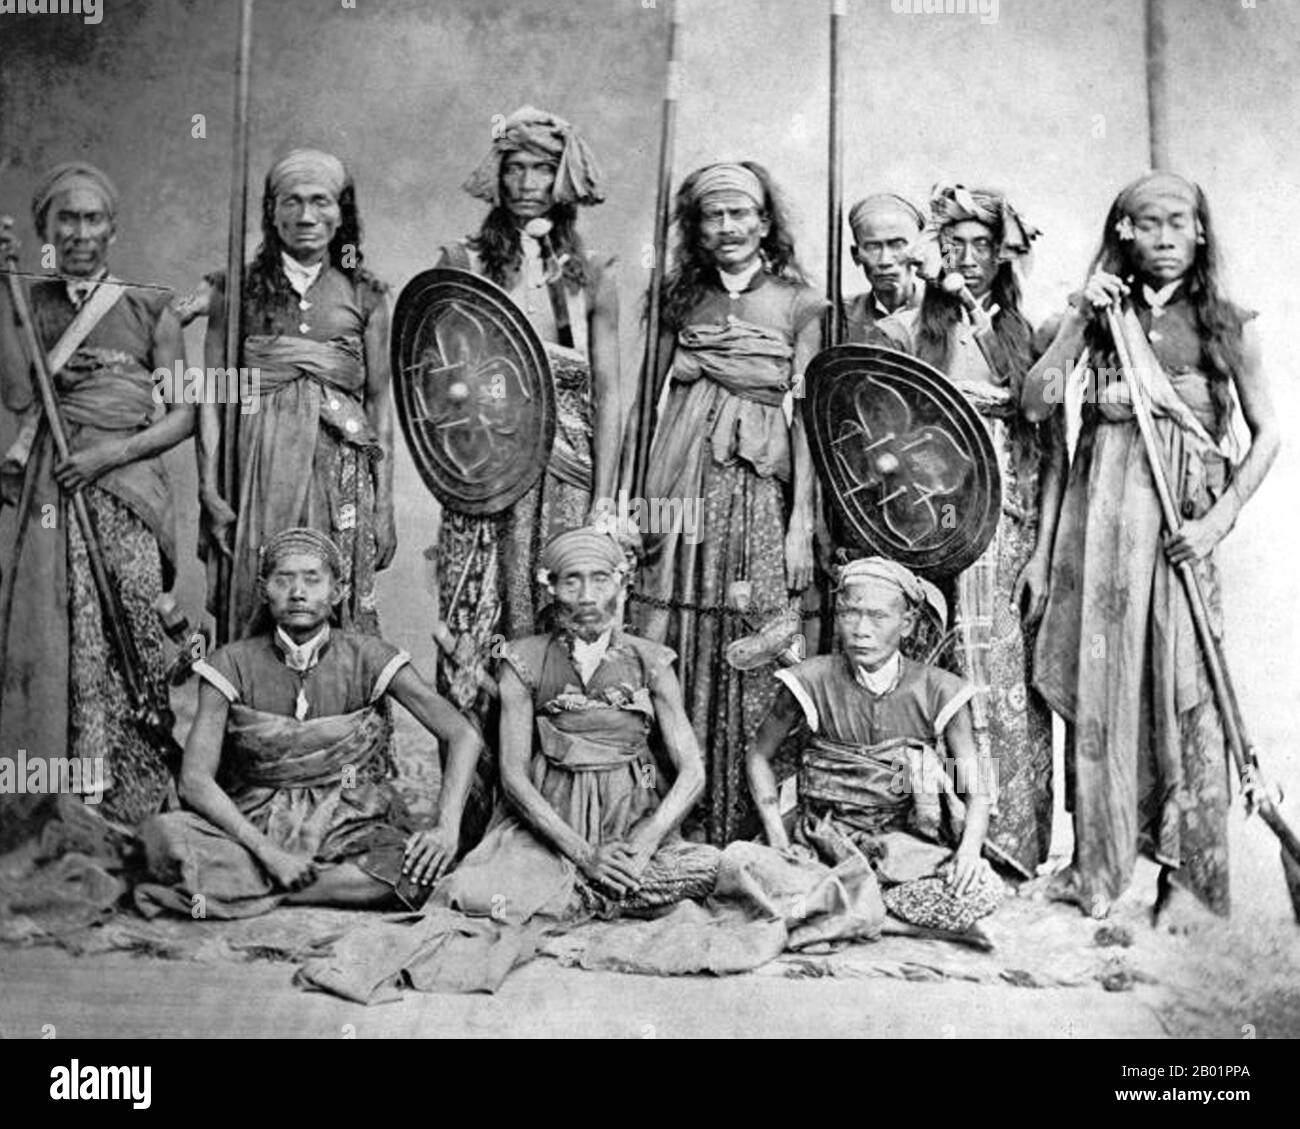 Indonesia: A group of Sasak chiefs on Lombok Island, c. 1870-1890.  The Sasak live mainly on the island of Lombok, Indonesia, numbering around 2.6 million (85% of Lombok's population). They are related to the Balinese in language and race, although the Sasak are predominantly Muslim while the Balinese are Hindu. Stock Photo